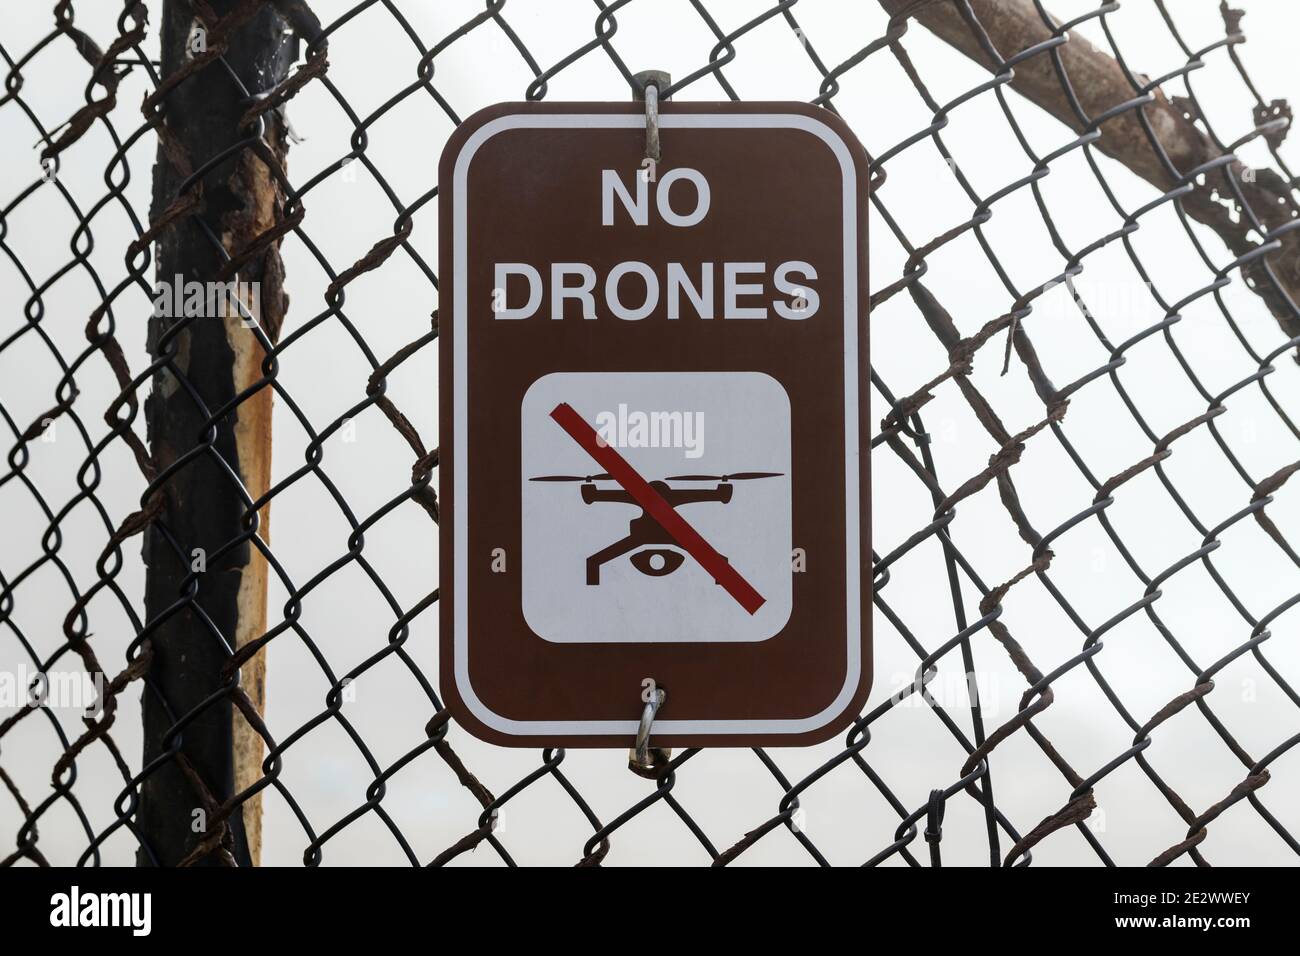 No drones warning sign on old rusty fence. Stock Photo